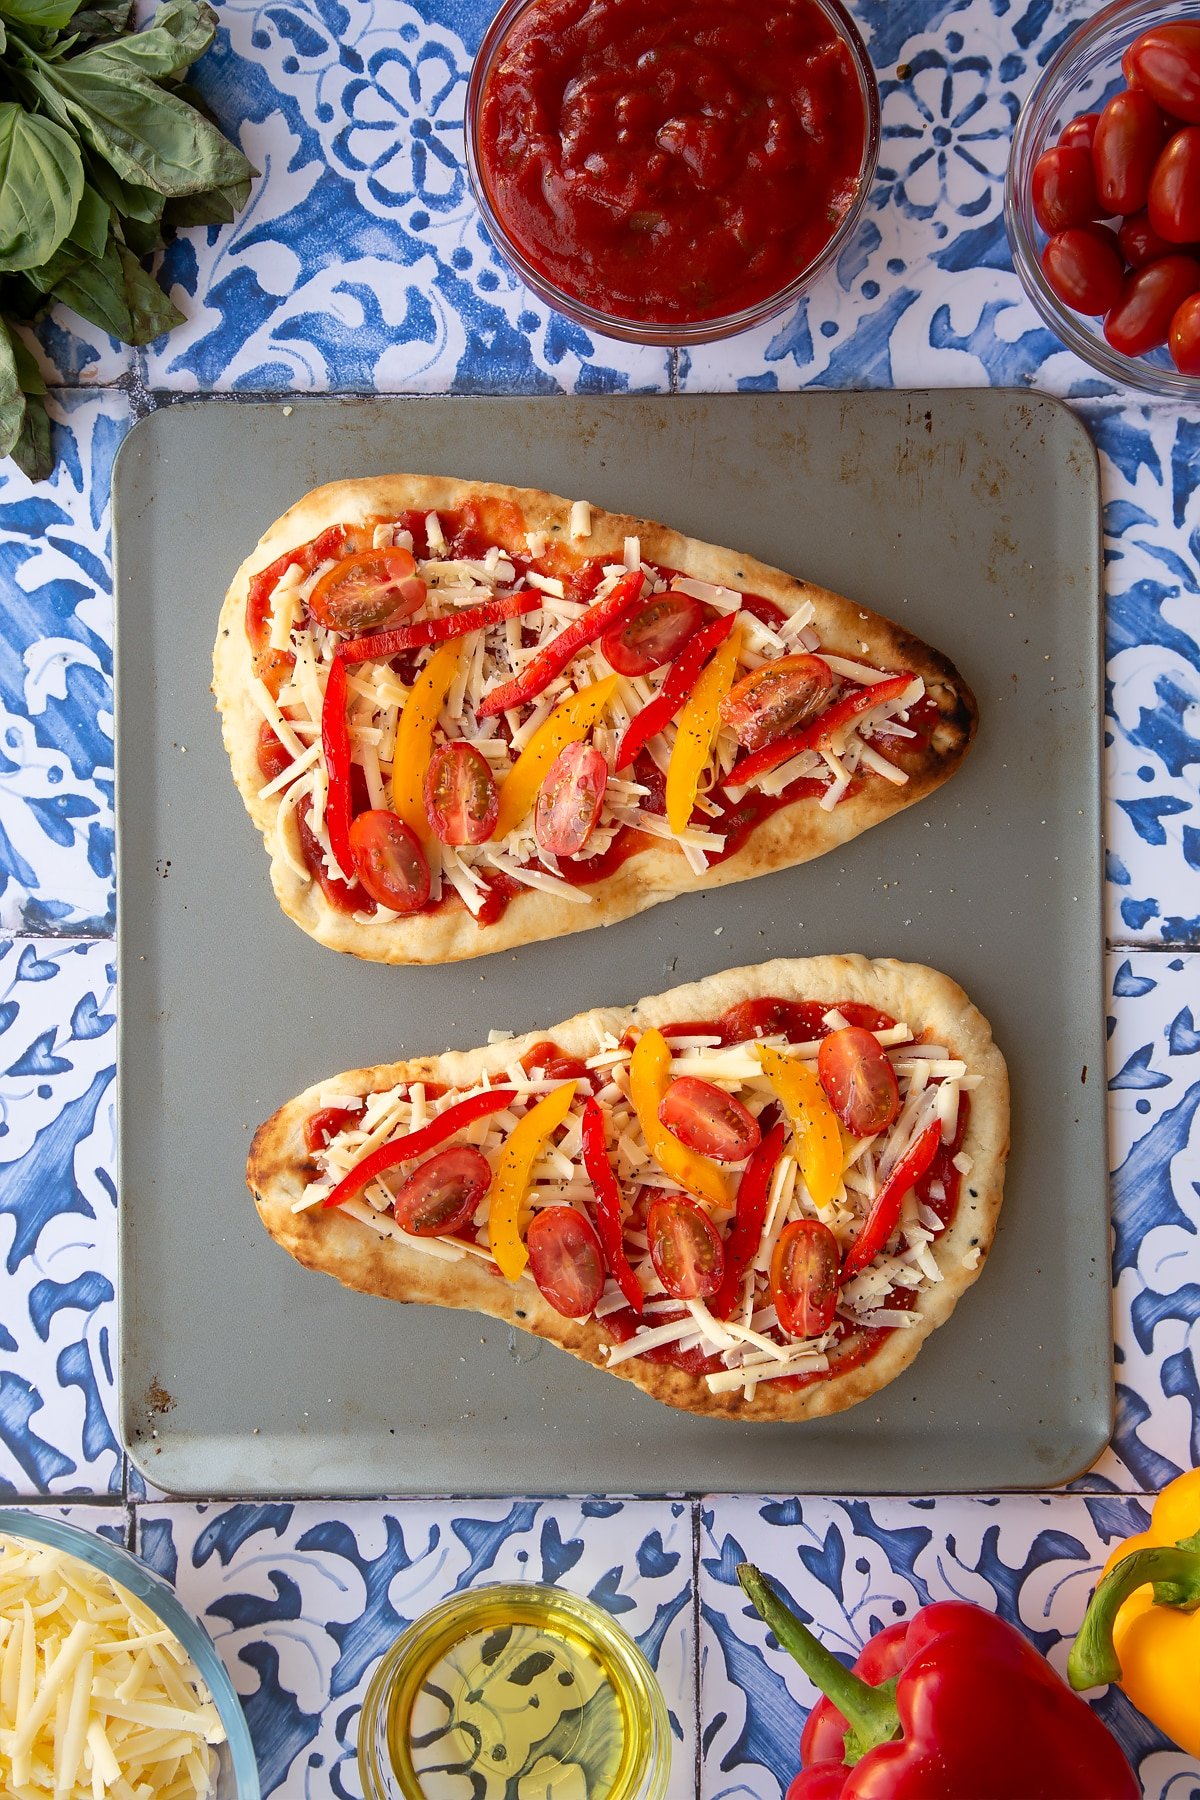 Two naan bread pizzas situated on top of a square baking tray surrounded by some of the ingredients required to make the dish.